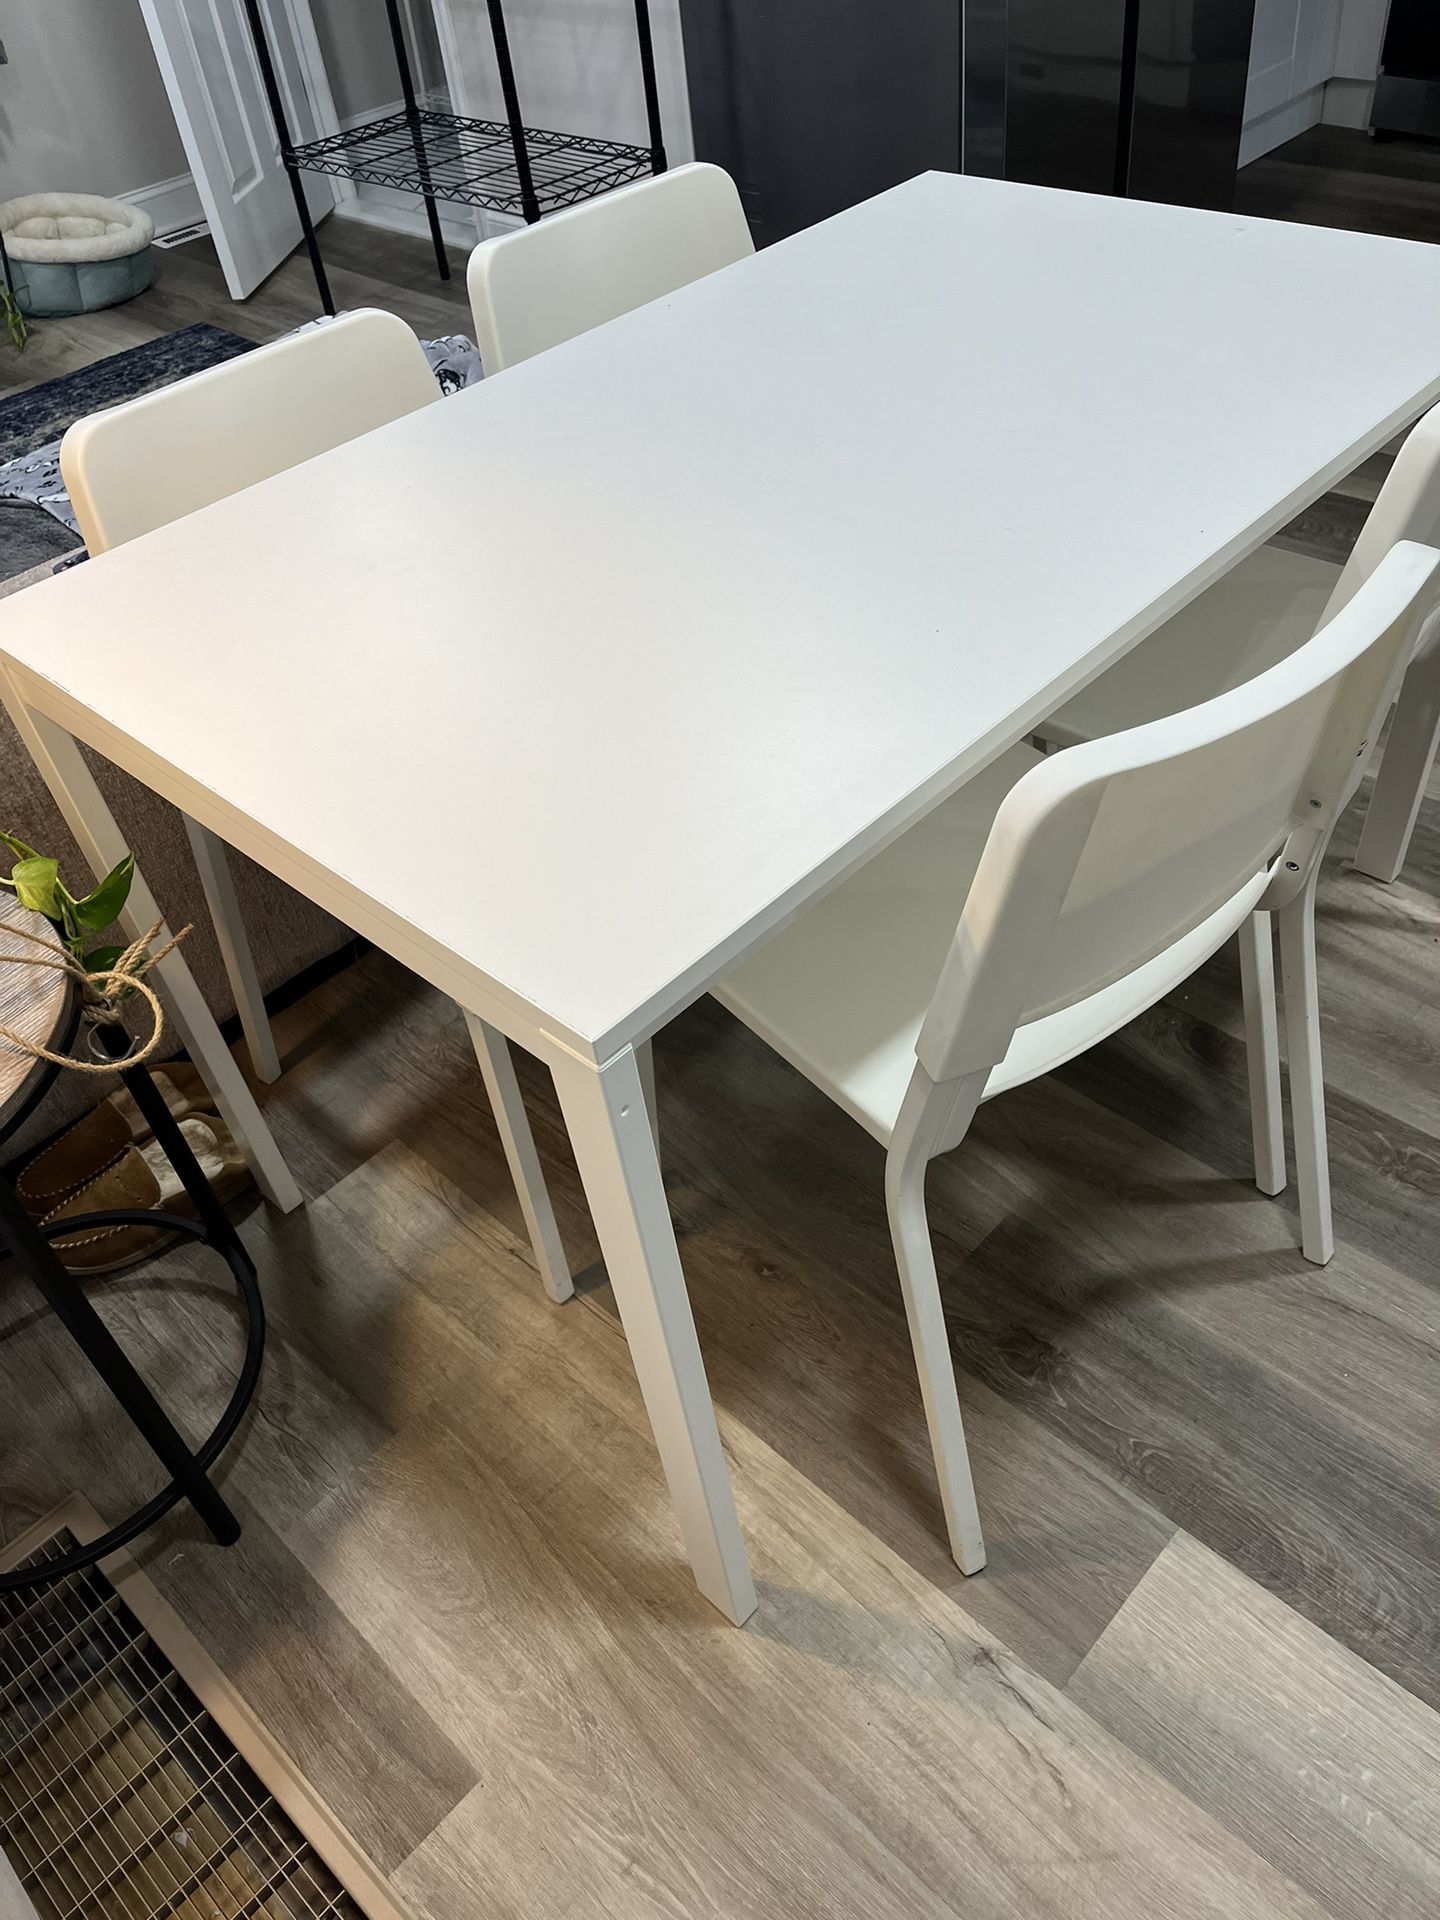 White IKEA Kitchen Table and Chairs 